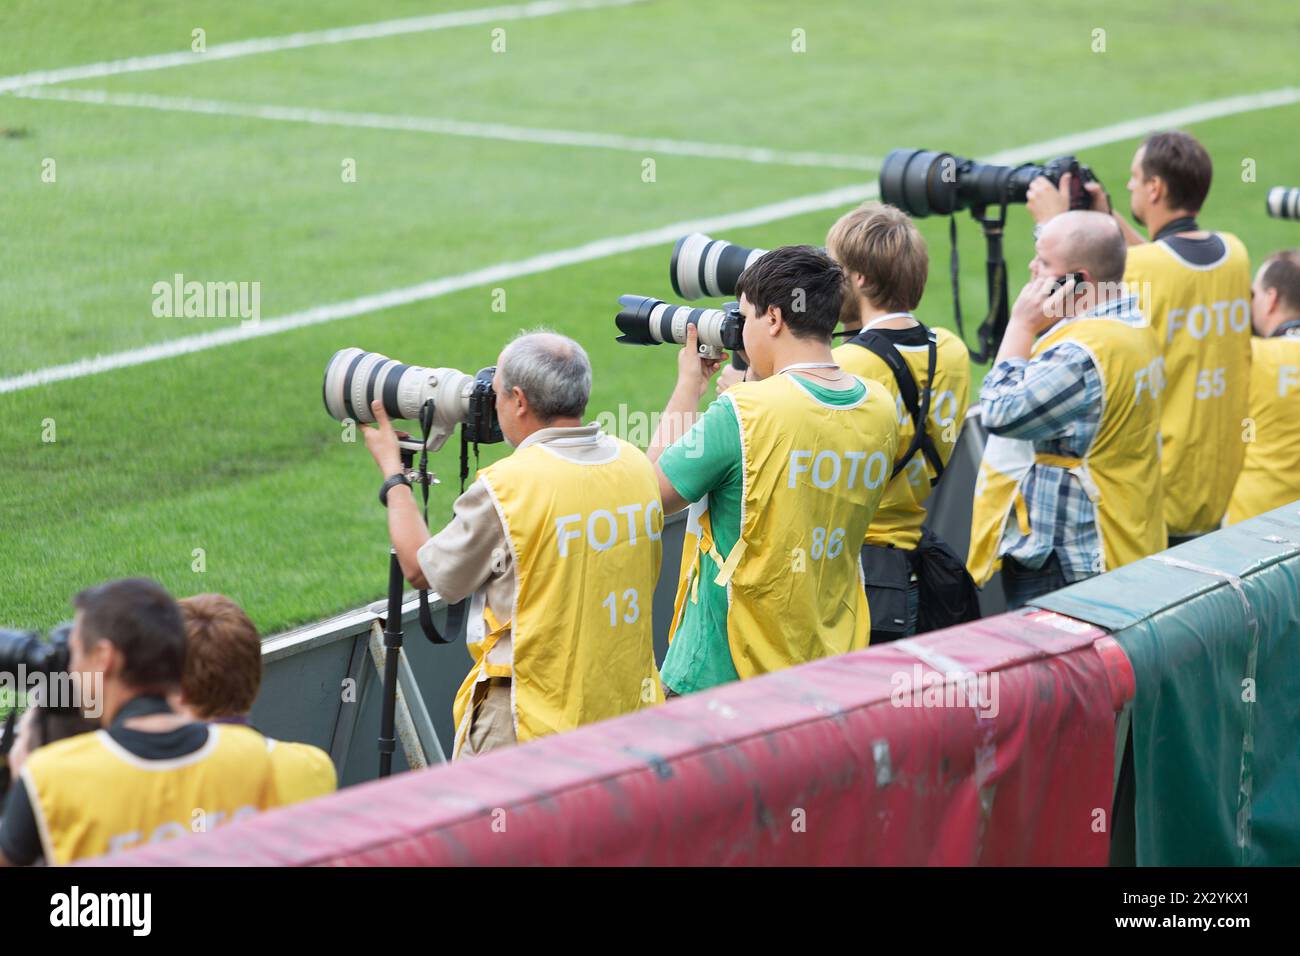 MOSCOW - AUG 15:  Photographers shoot the game between Russia national team and Ivory Coast at Lokomotiv Stadium on August 15, 2012 in Moscow, Russia. Stock Photo